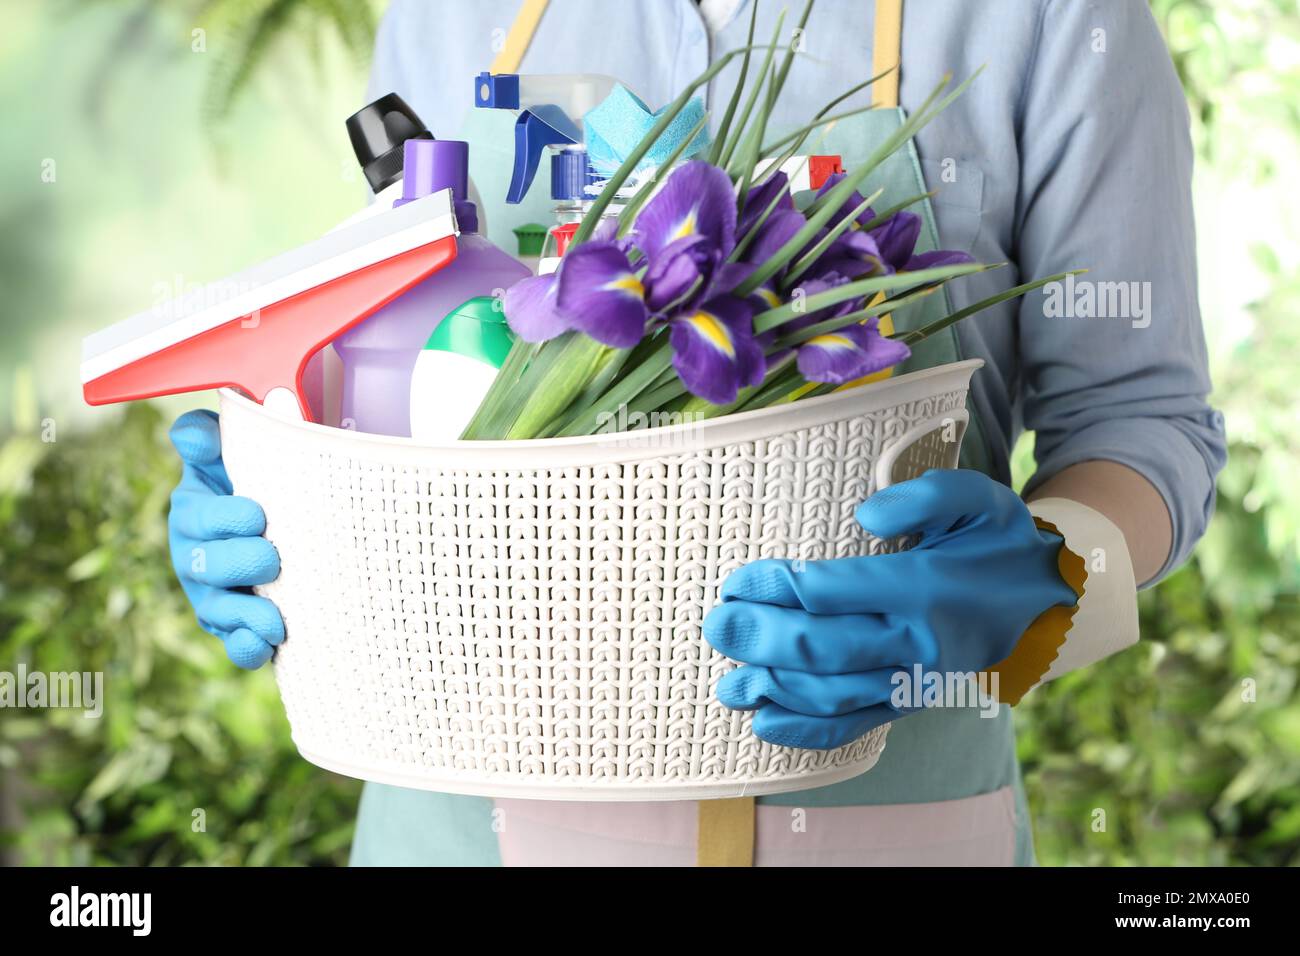 Woman holding basket with spring flowers and cleaning supplies on green blurred background, closeup Stock Photo